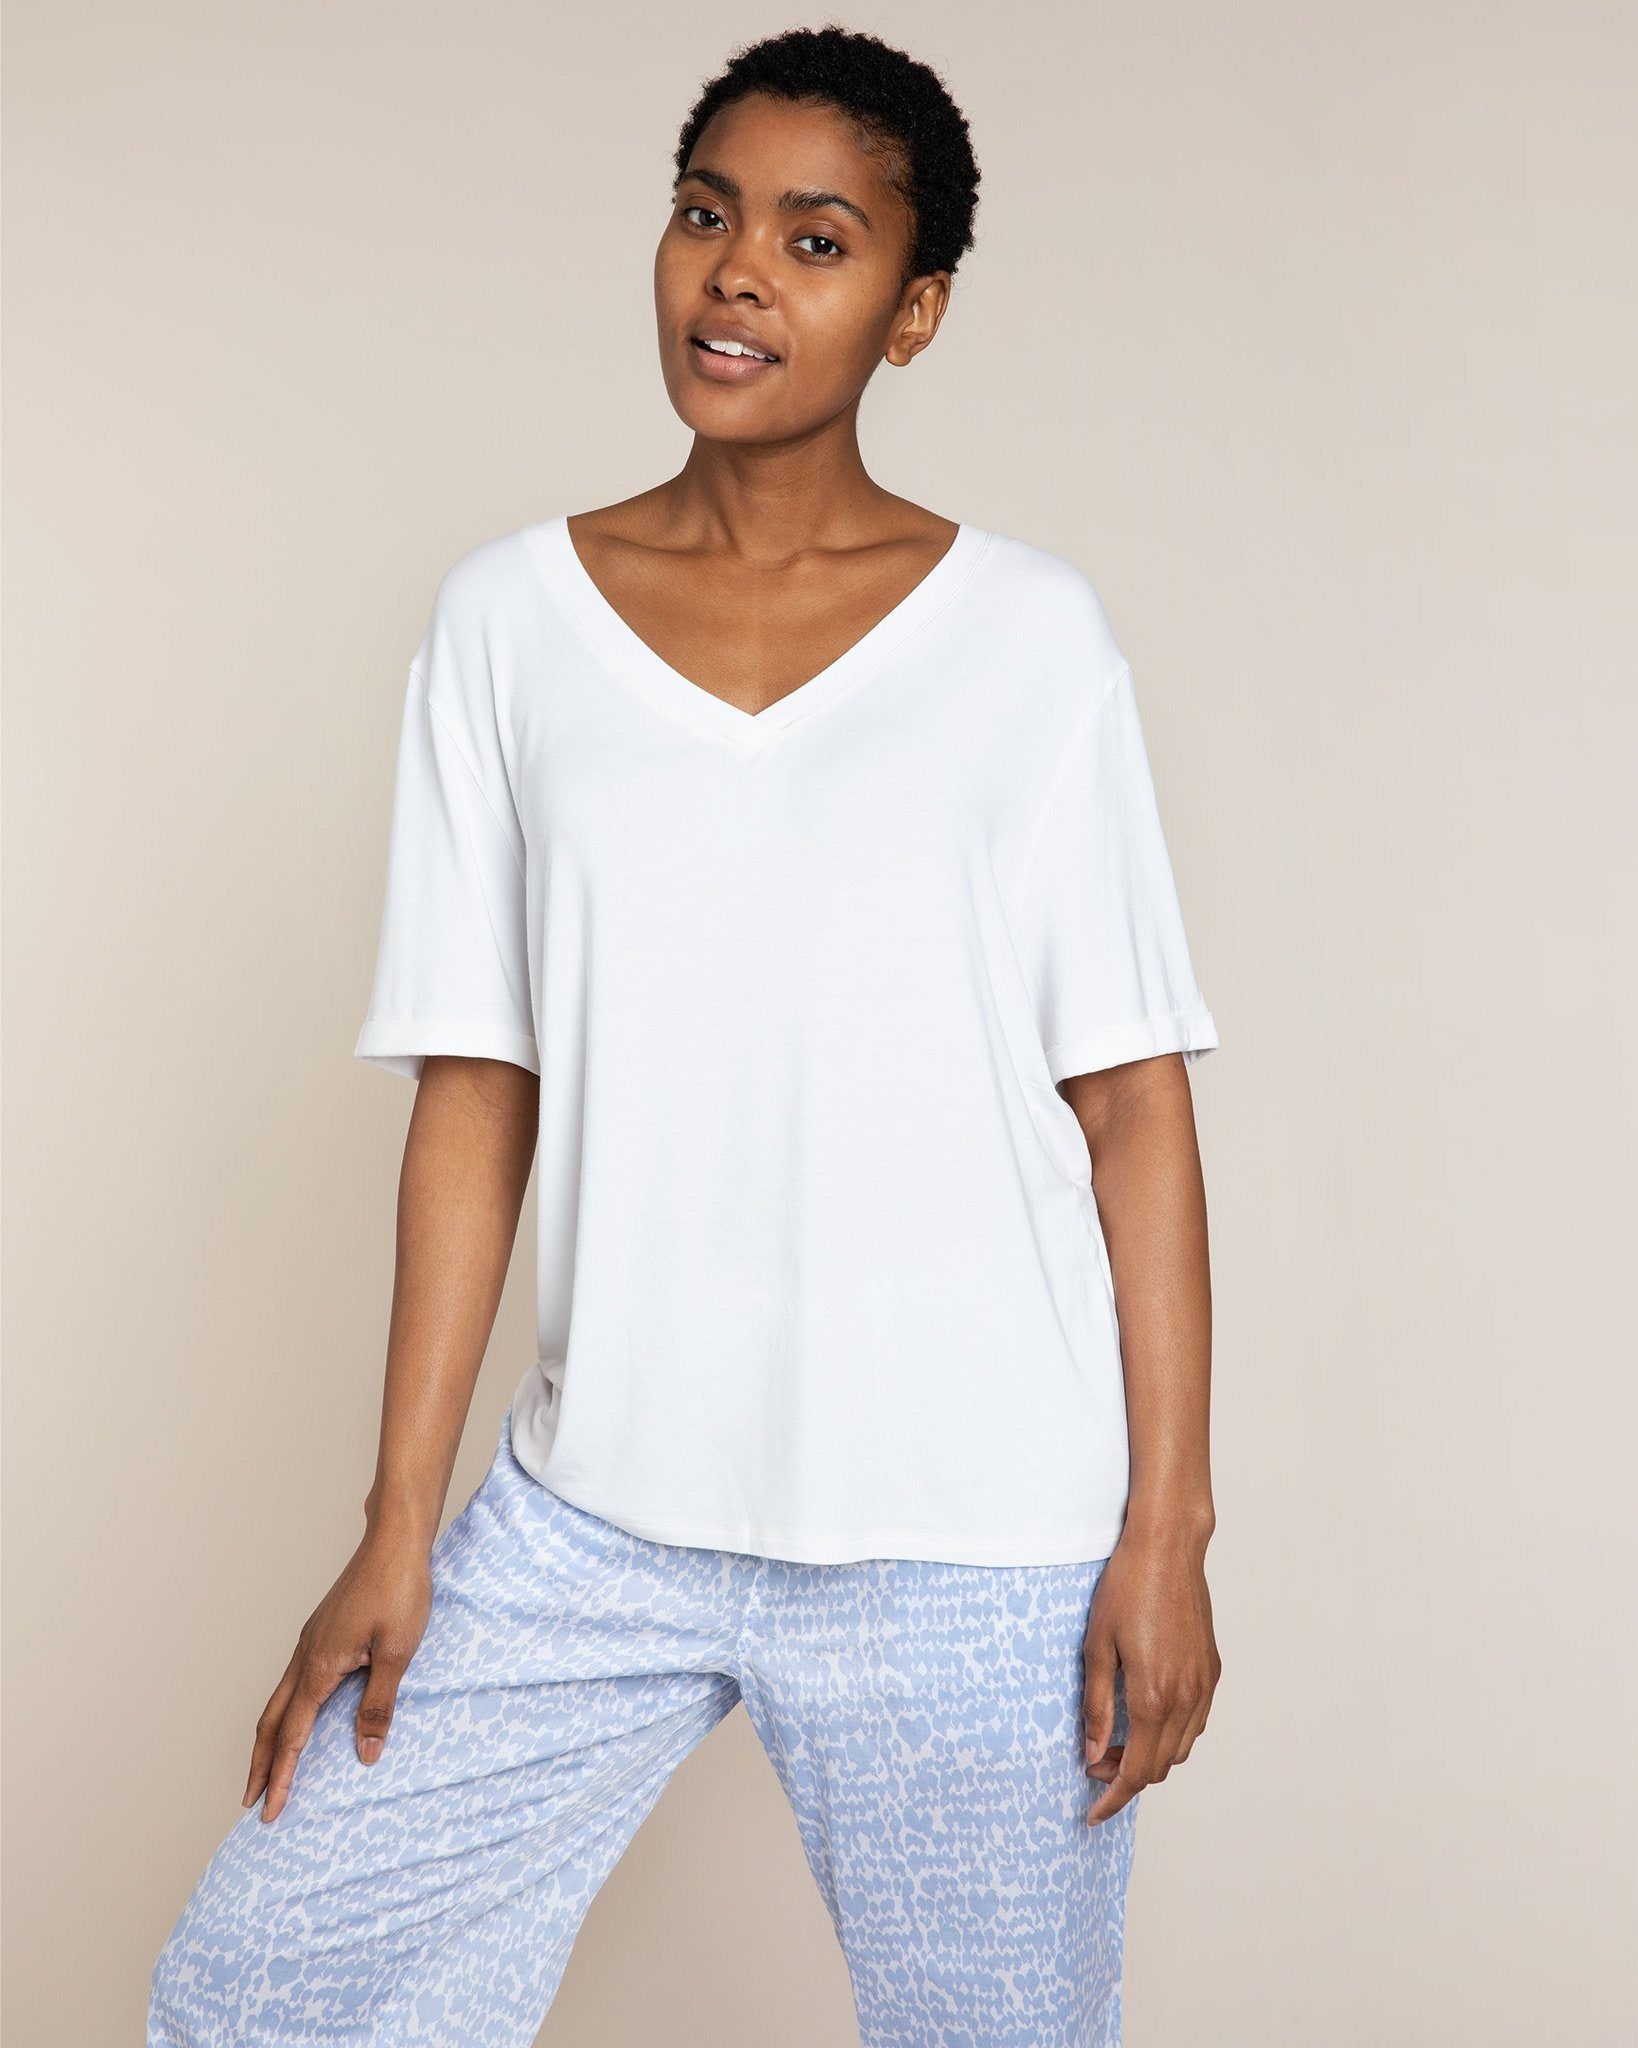 RELAXED V-NECK TOP in White, VENUS